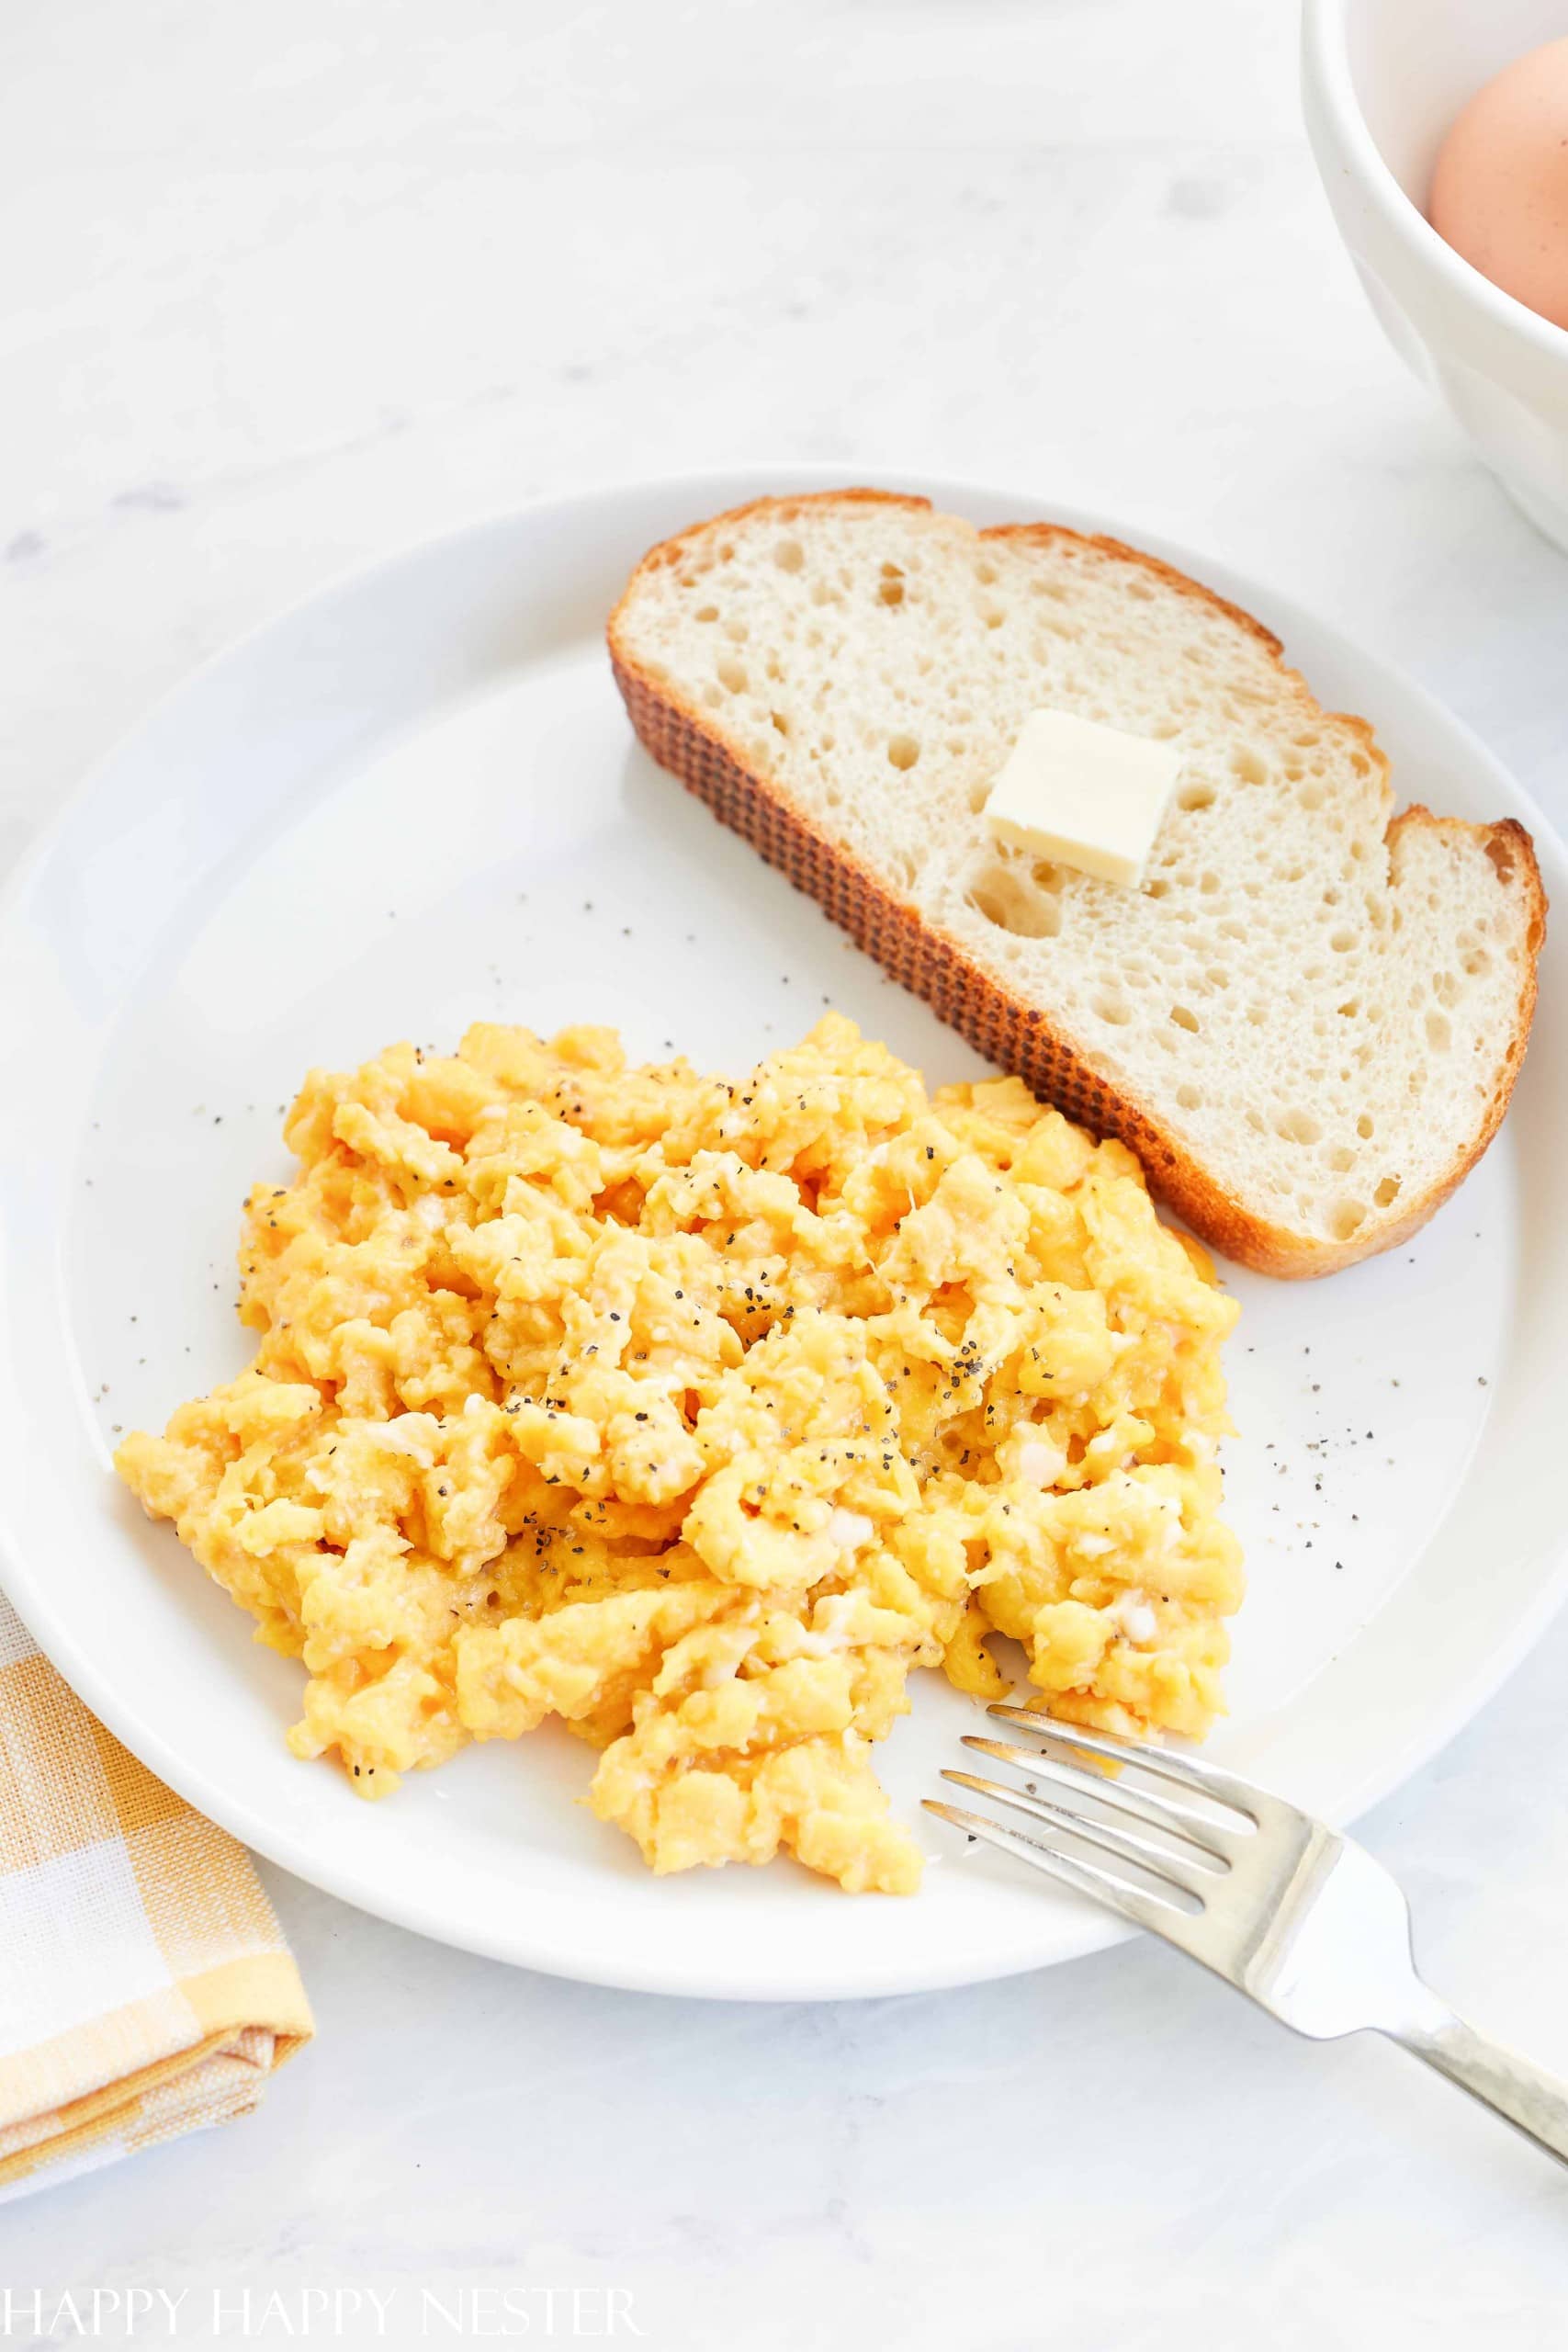 how to make scrambled eggs in an All-Clad pan 